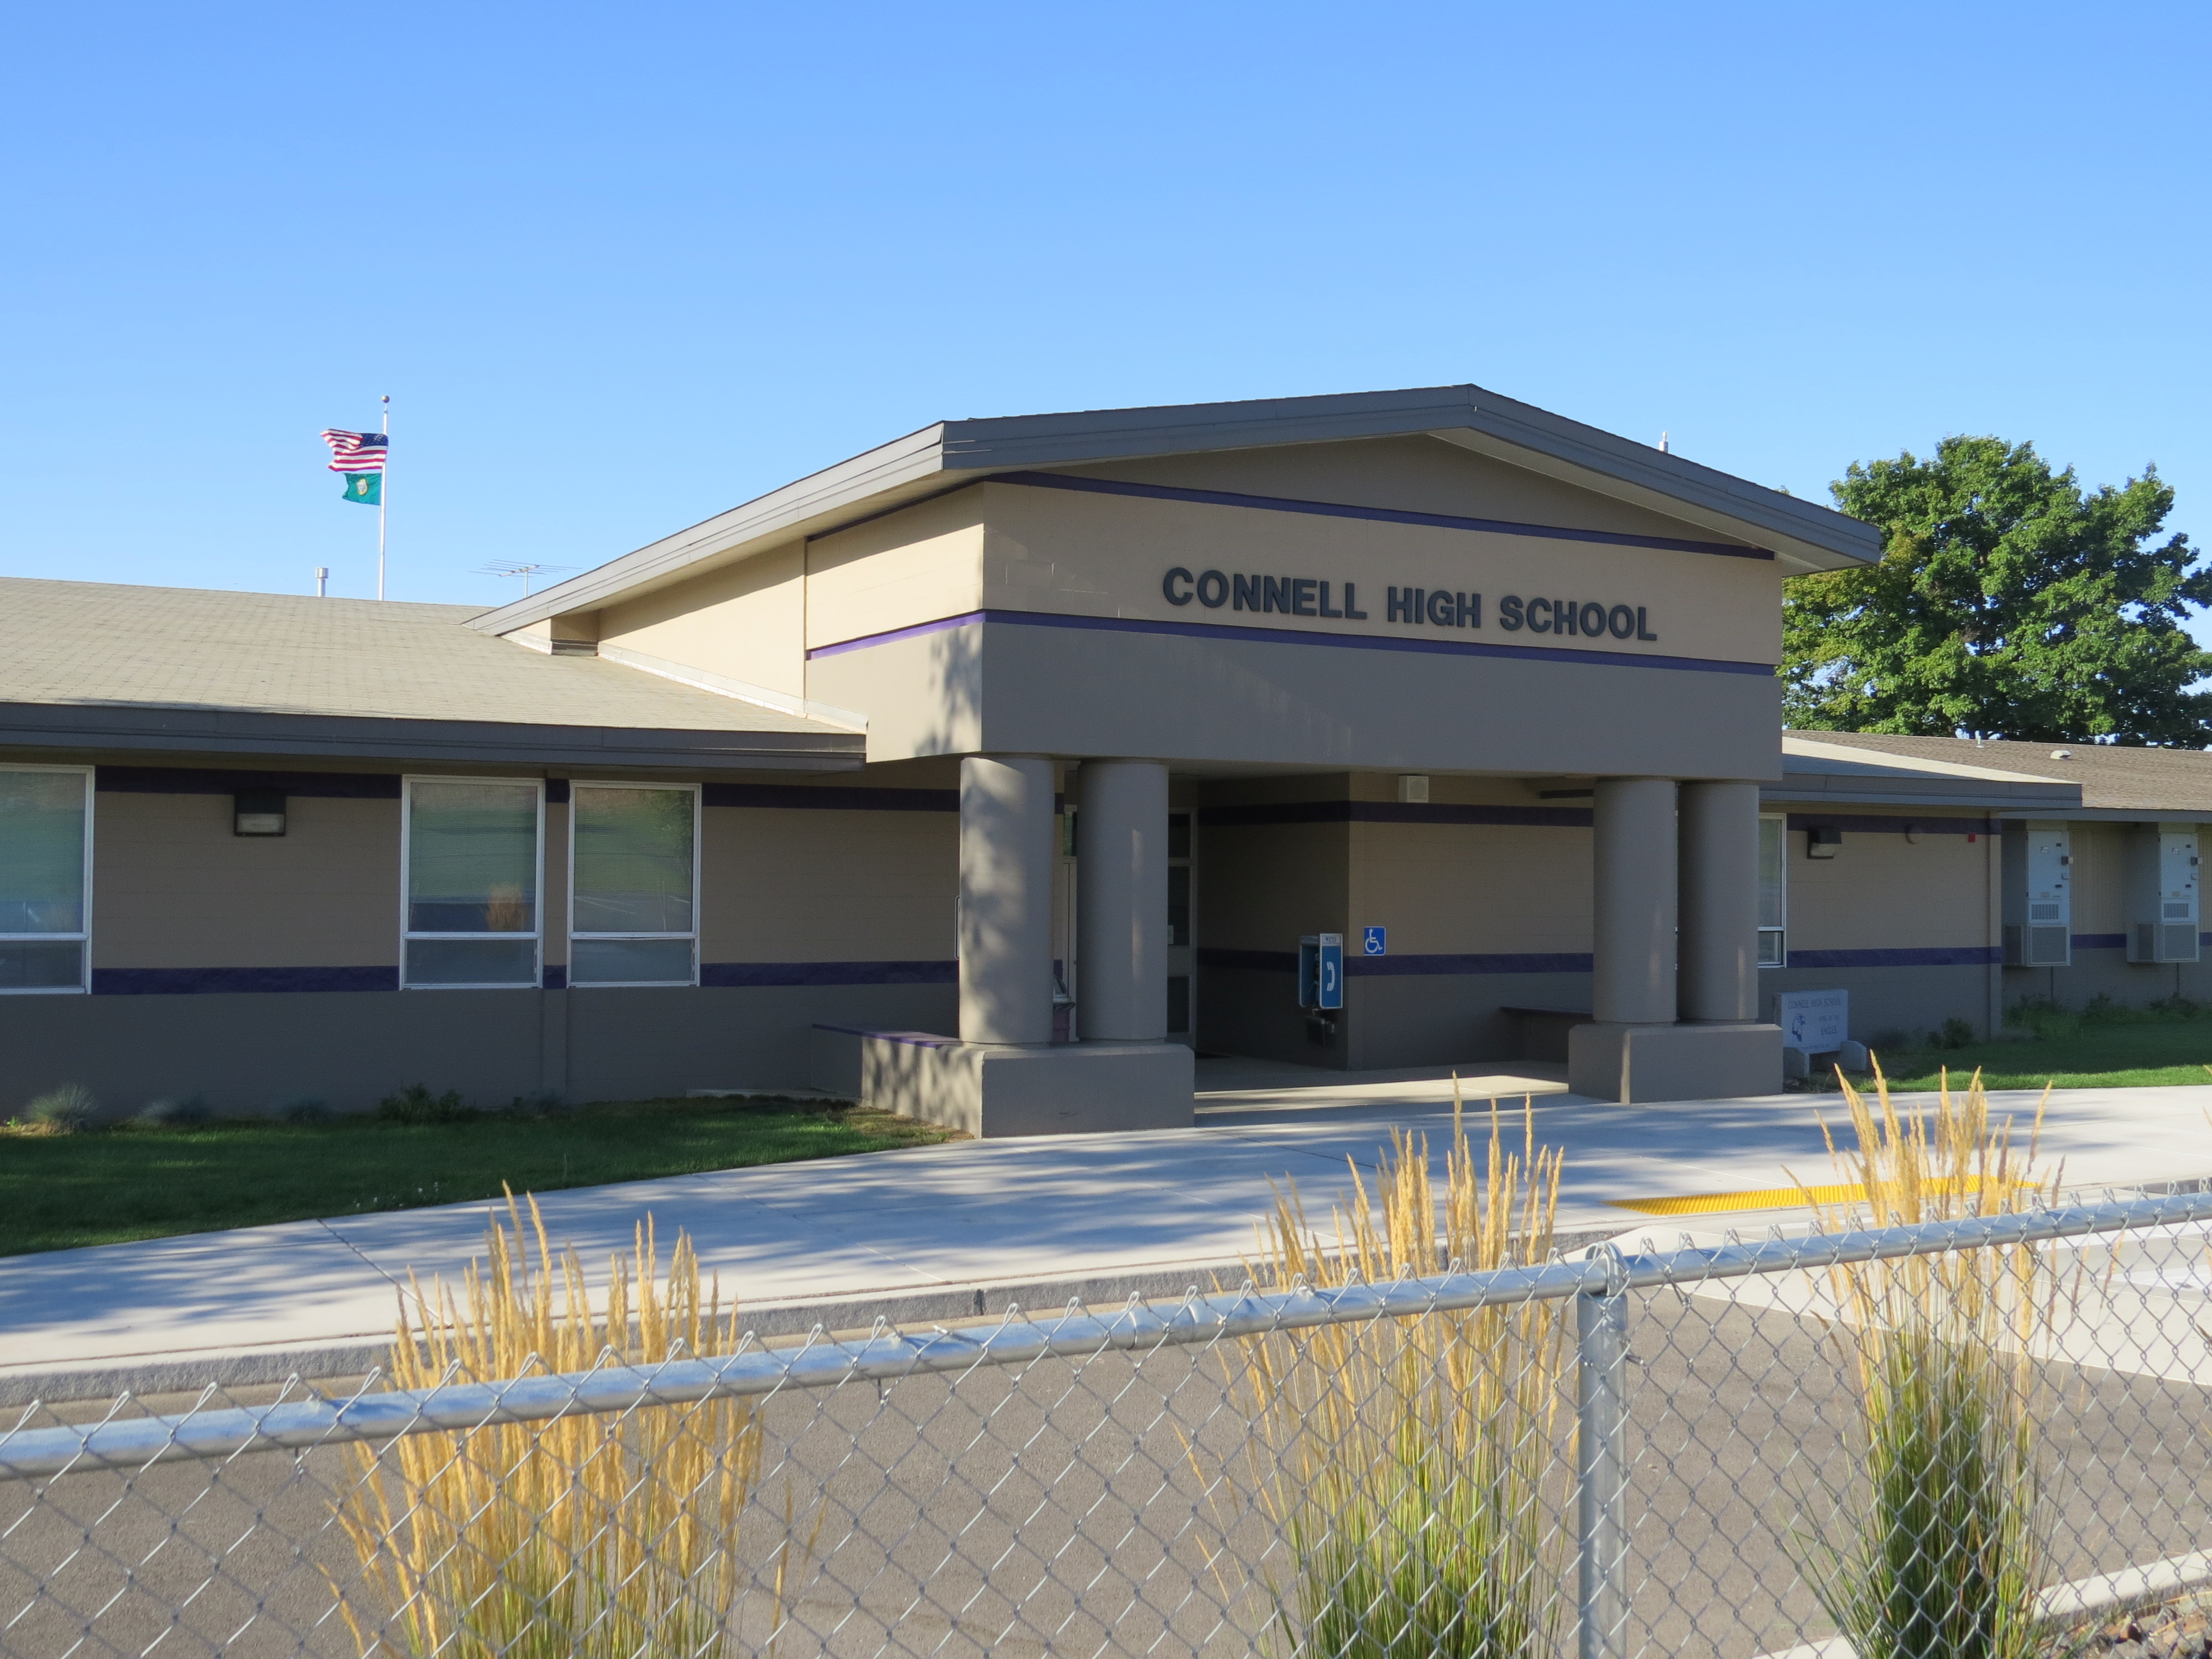 The Connell High School